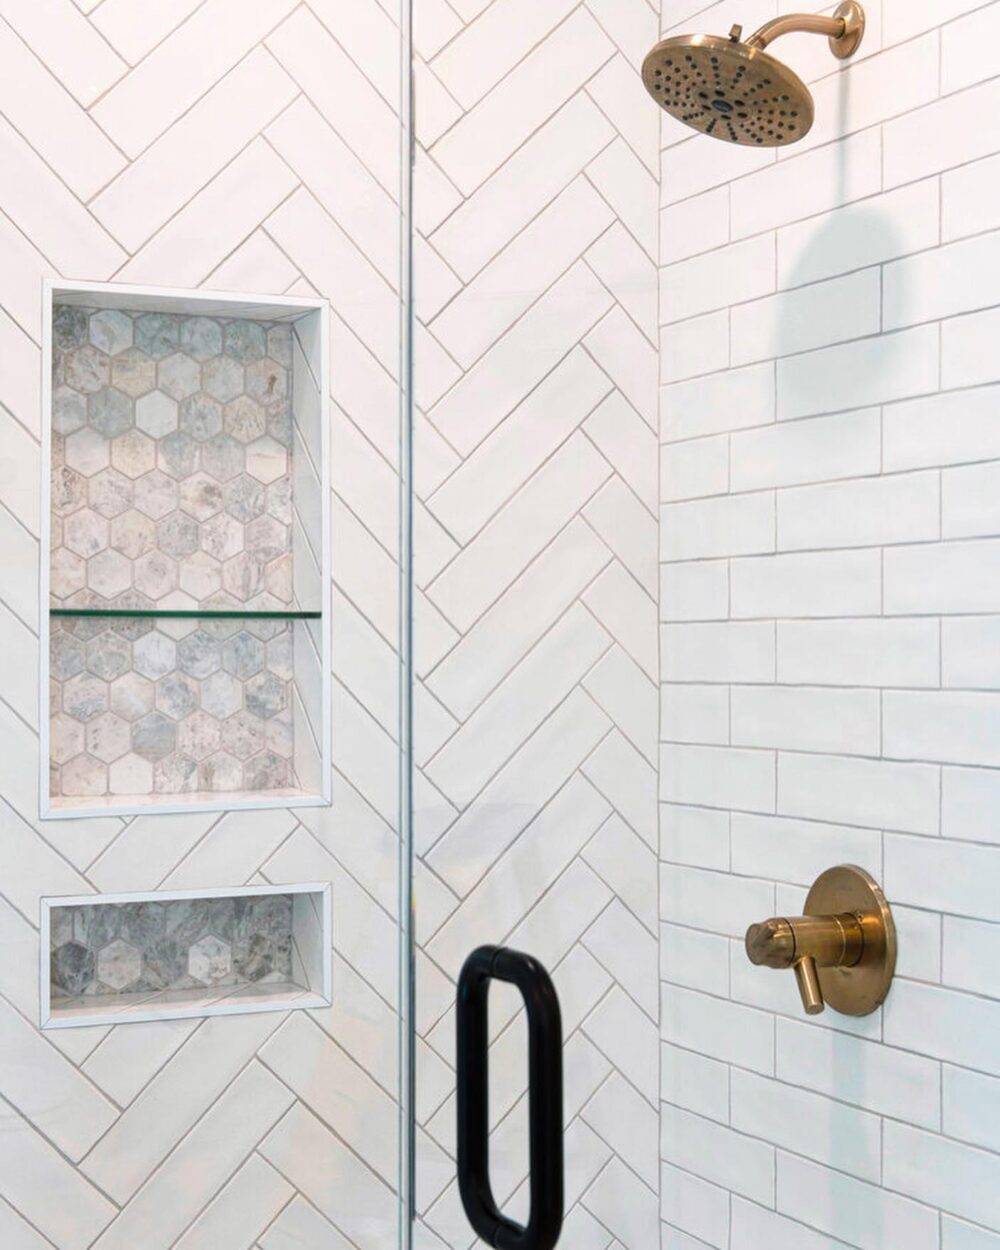 Shower with white subway tile in herringbone and brick bond patterns.